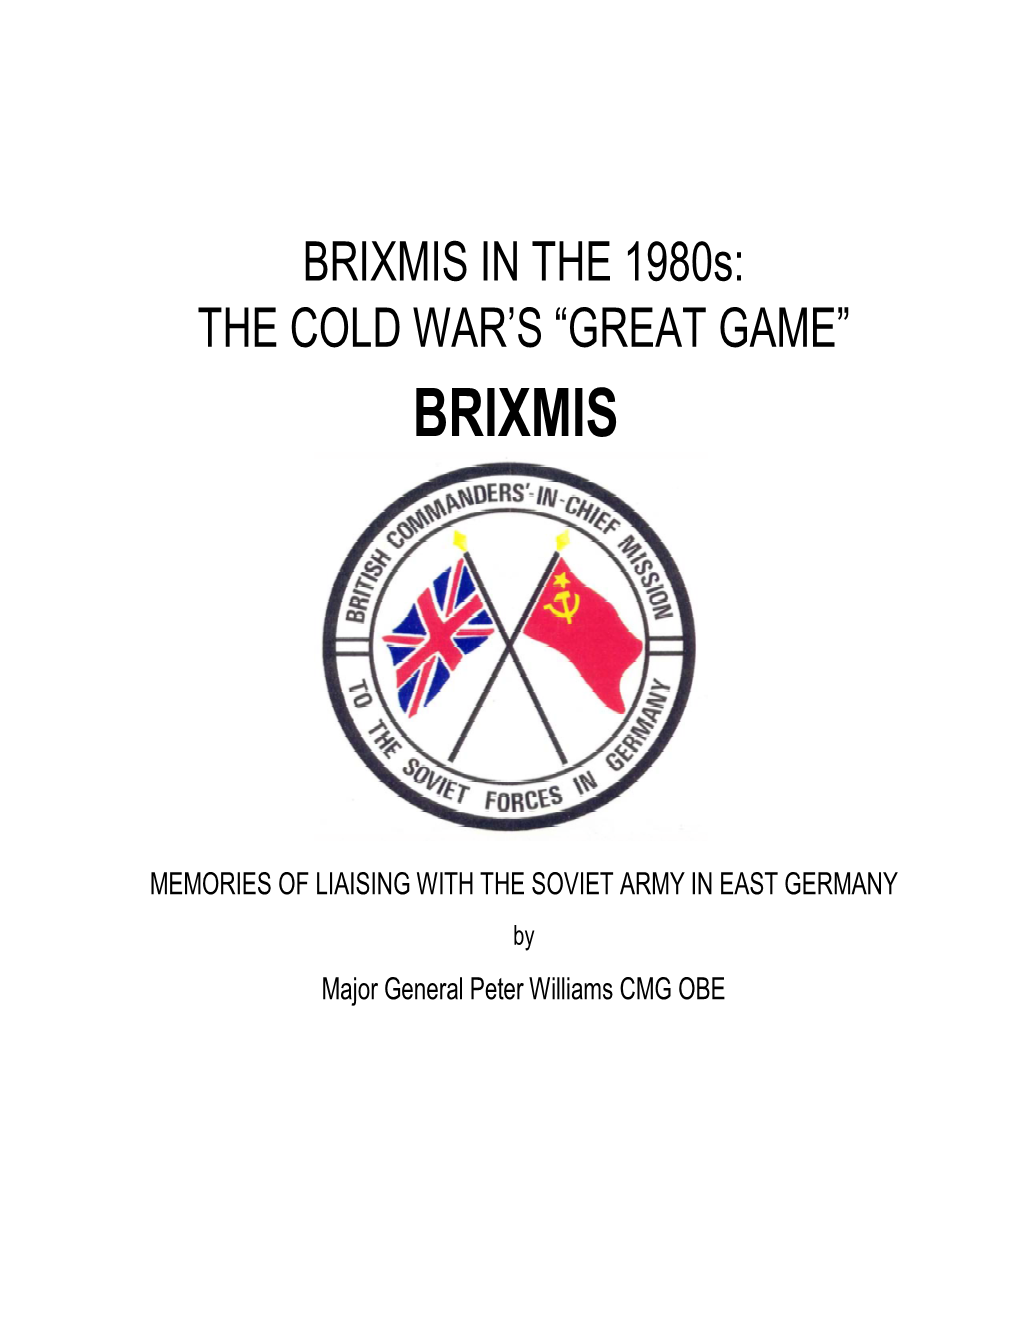 BRIXMIS in the 1980S: the COLD WAR’S “GREAT GAME” BRIXMIS